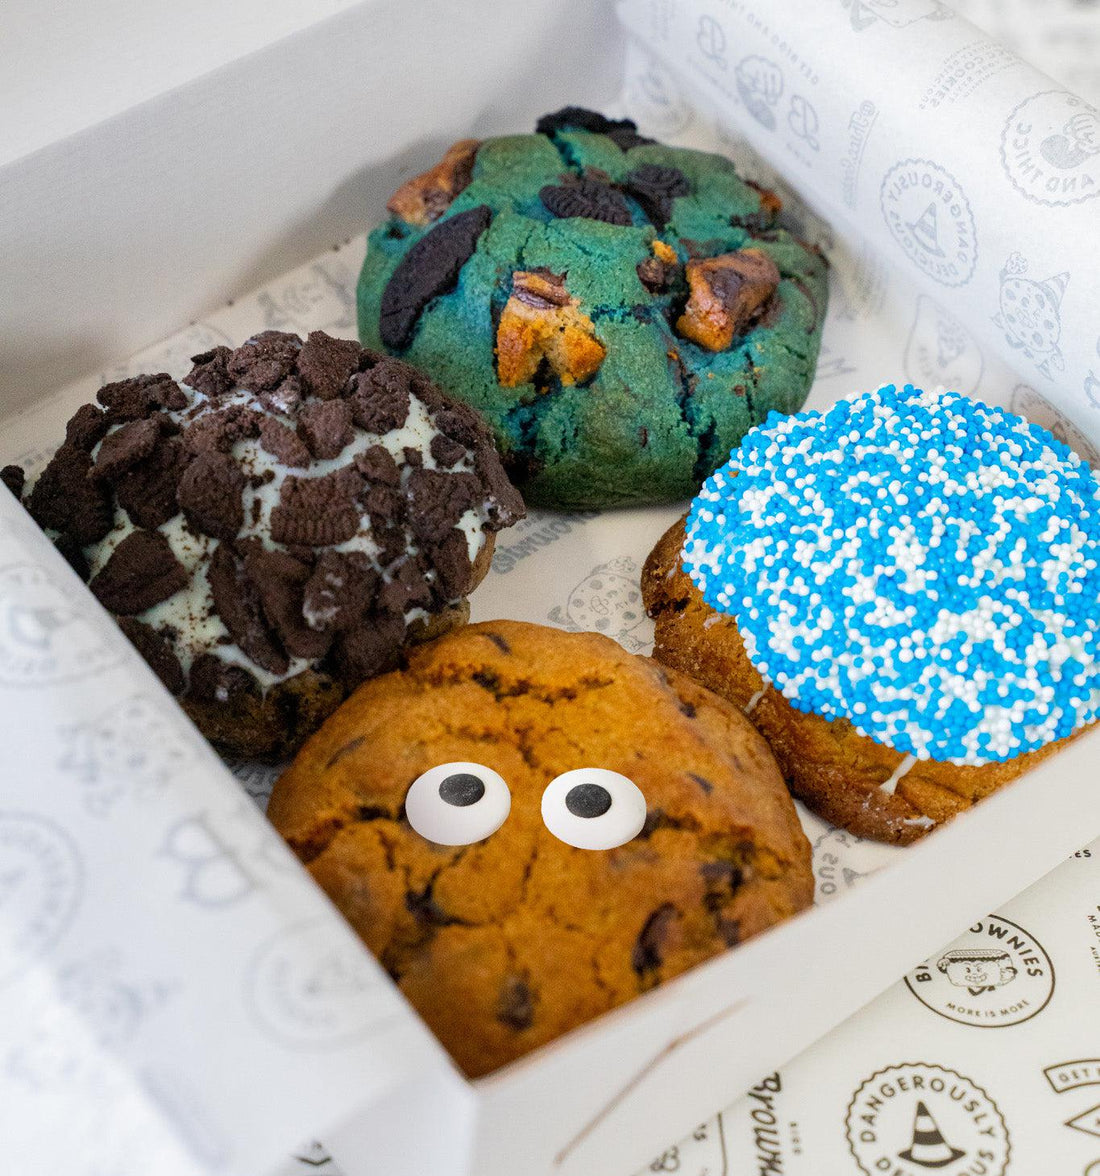 THE COOKIE MONSTER BOX IS HERE 🍪💙